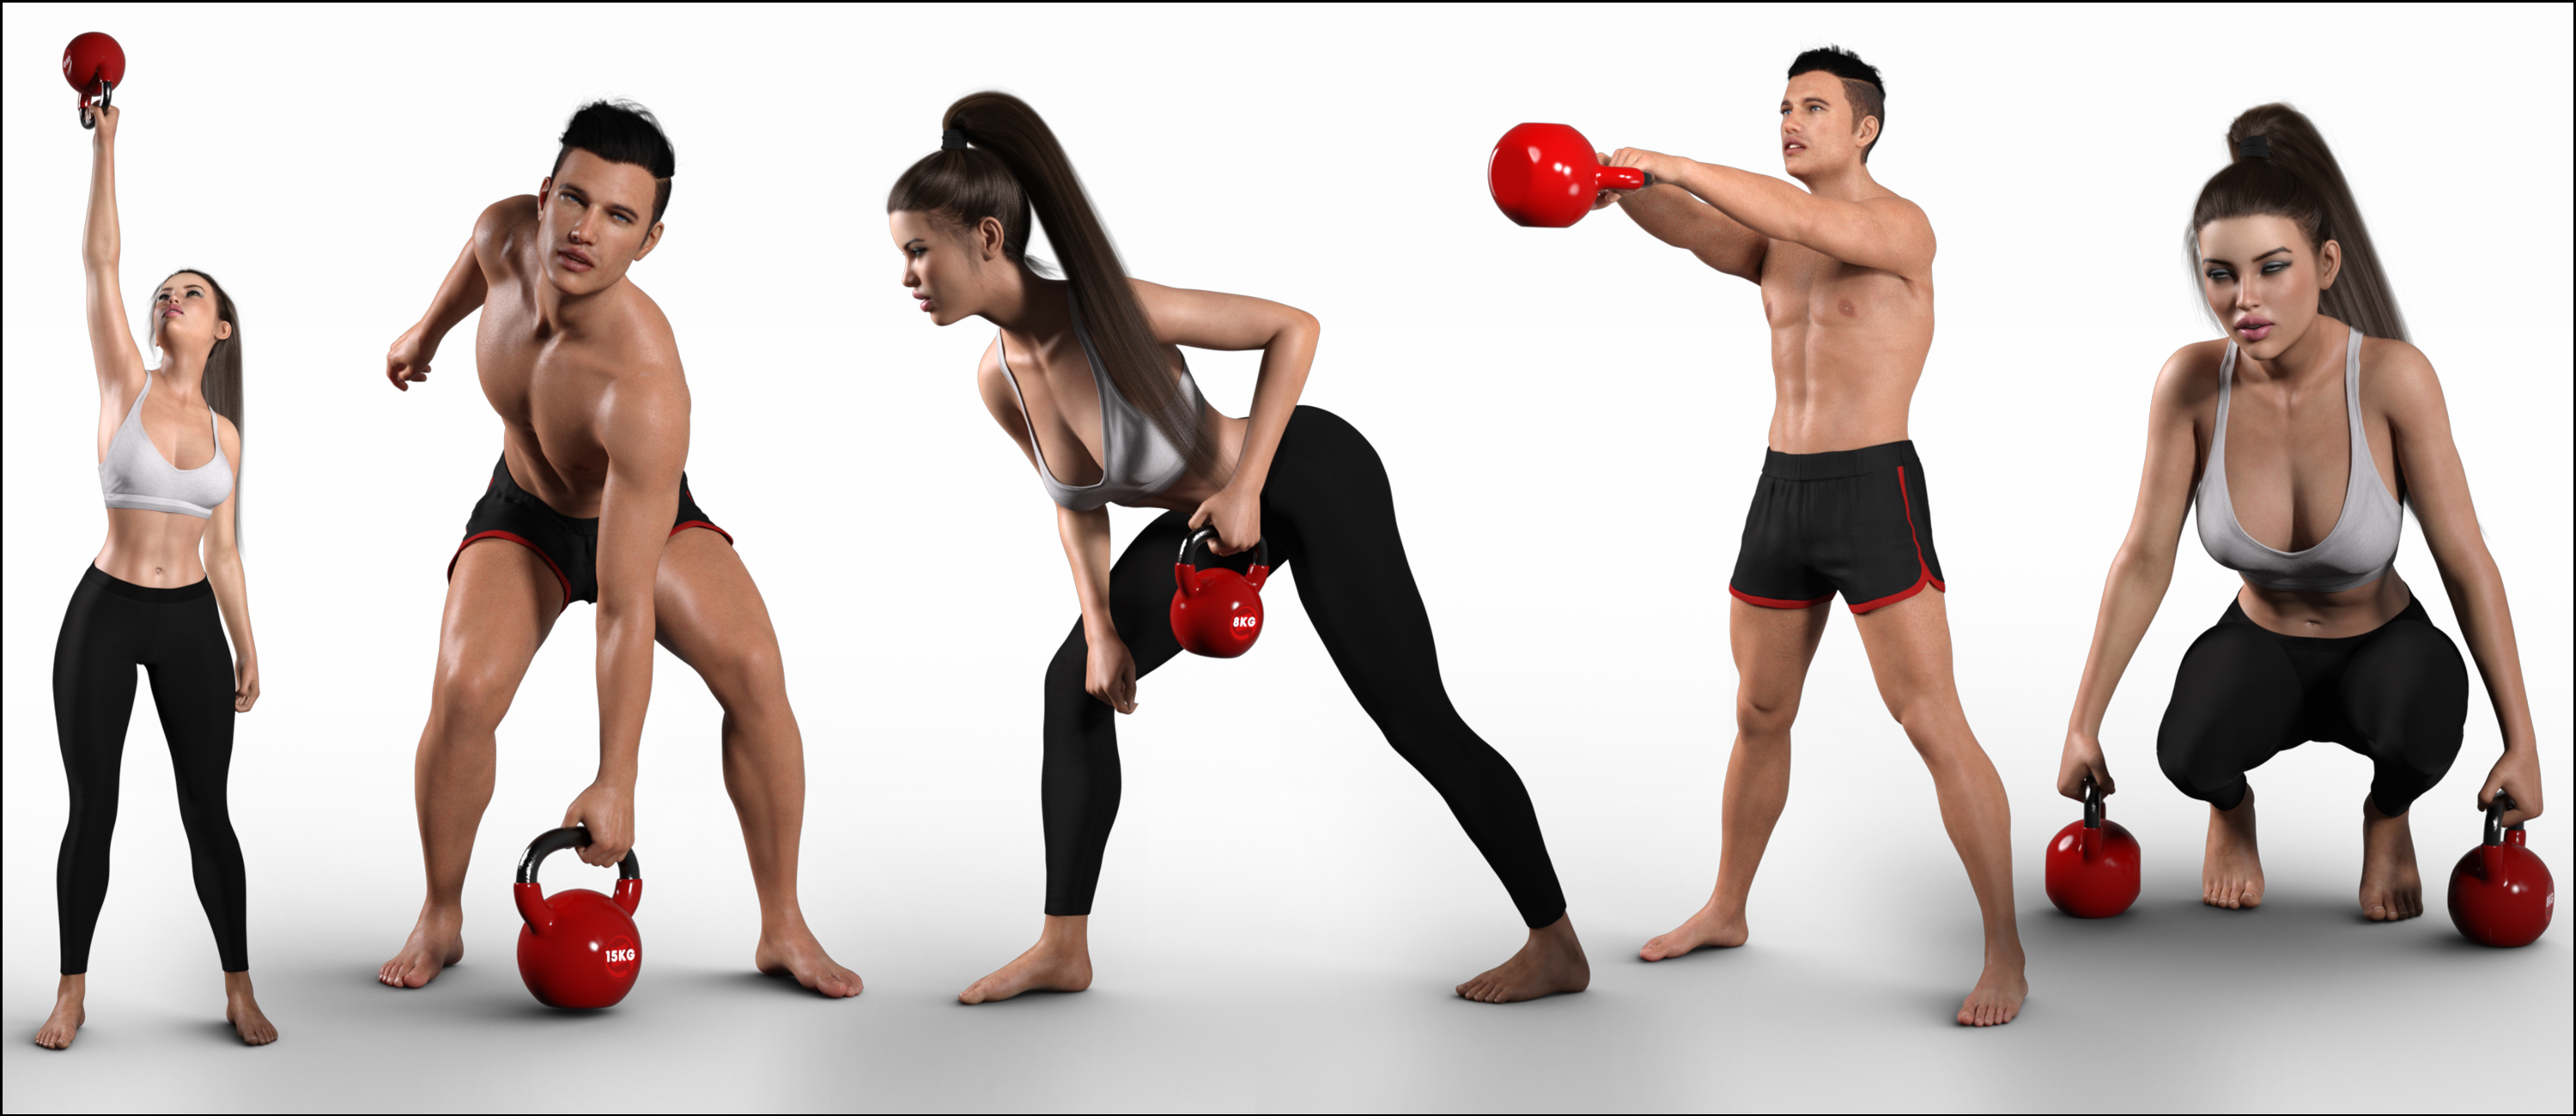 Z Swing That Kettlebell - Props and Poses for Genesis 8 by: Zeddicuss, 3D Models by Daz 3D